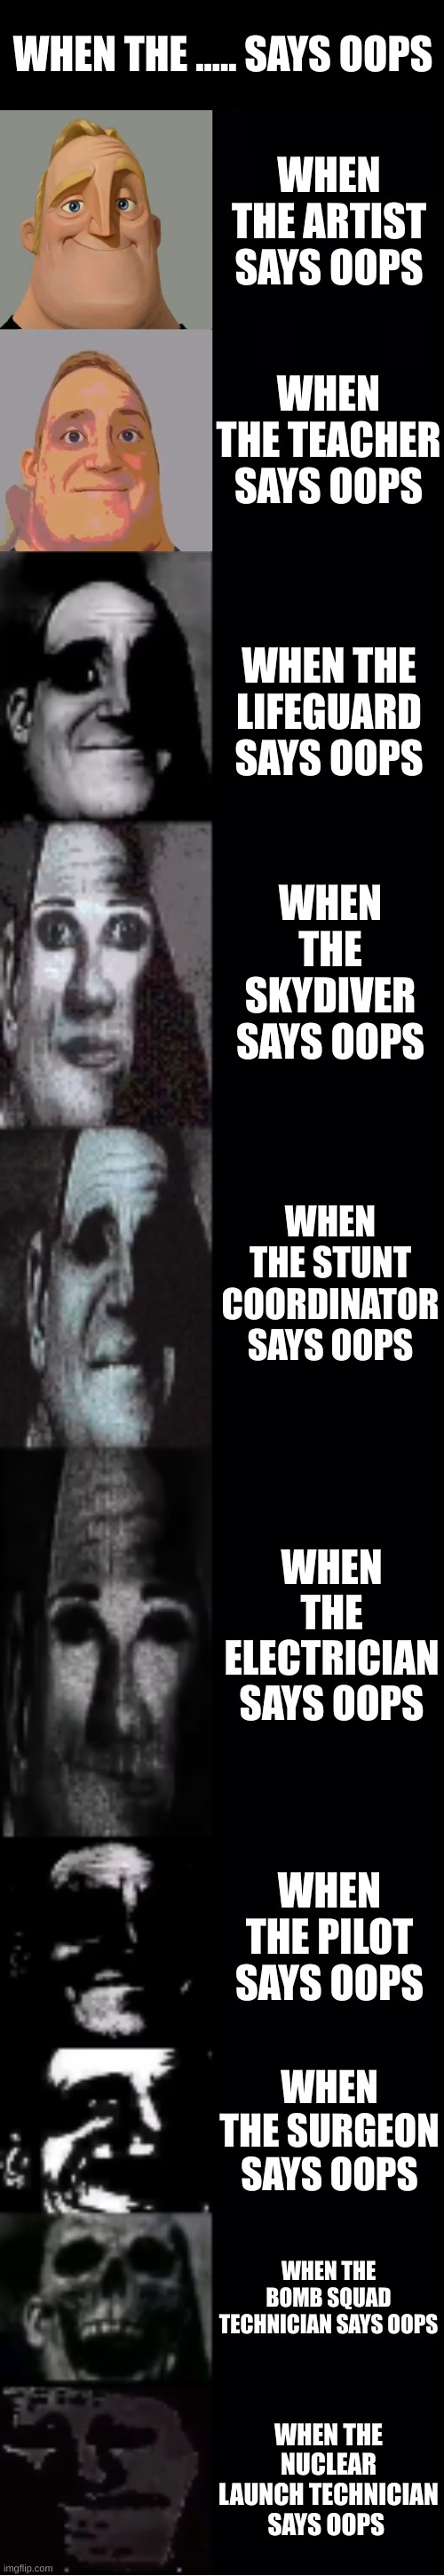 When the..........says oops | WHEN THE ..... SAYS OOPS; WHEN THE ARTIST SAYS OOPS; WHEN THE TEACHER SAYS OOPS; WHEN THE LIFEGUARD SAYS OOPS; WHEN THE SKYDIVER SAYS OOPS; WHEN THE STUNT COORDINATOR SAYS OOPS; WHEN THE ELECTRICIAN SAYS OOPS; WHEN THE PILOT SAYS OOPS; WHEN THE SURGEON SAYS OOPS; WHEN THE BOMB SQUAD TECHNICIAN SAYS OOPS; WHEN THE NUCLEAR LAUNCH TECHNICIAN SAYS OOPS | image tagged in mr incredible becoming uncanny | made w/ Imgflip meme maker